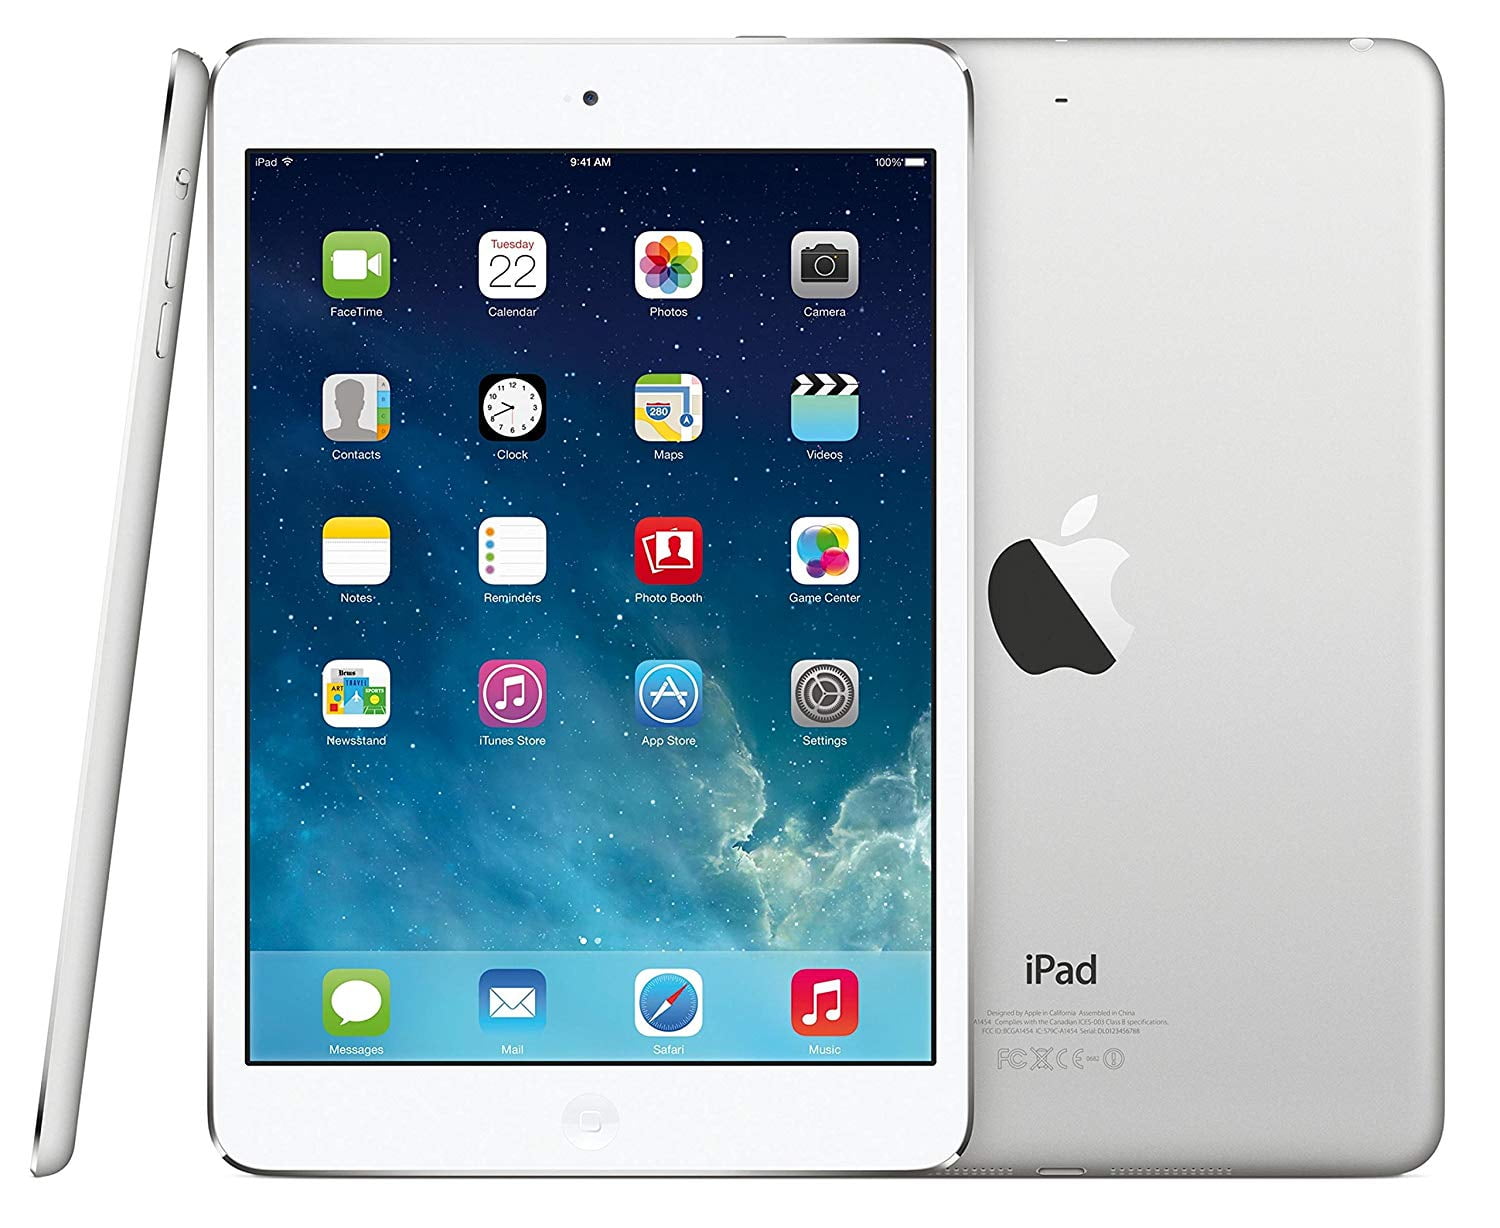 Refurbished Apple iPad Air 1st Gen with 9.7" Retina Display (64GB, Wi-Fi + AT&T 4G LTE, White or